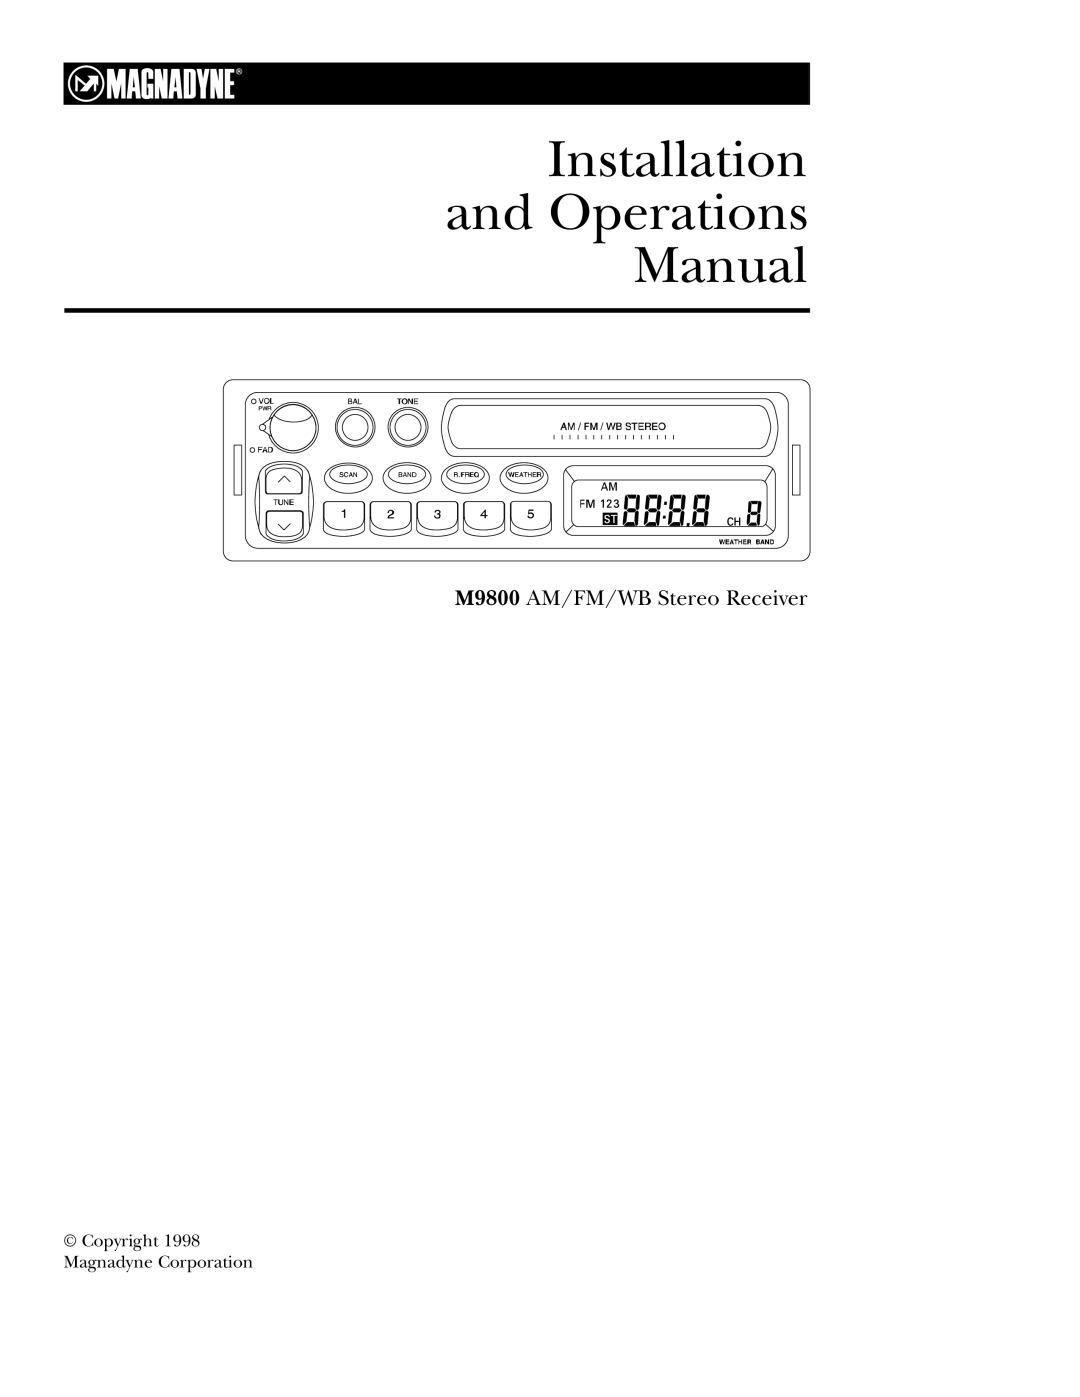 Magnadyne manual Installation and Operations Manual, M9800 AM/FM/WB Stereo Receiver 